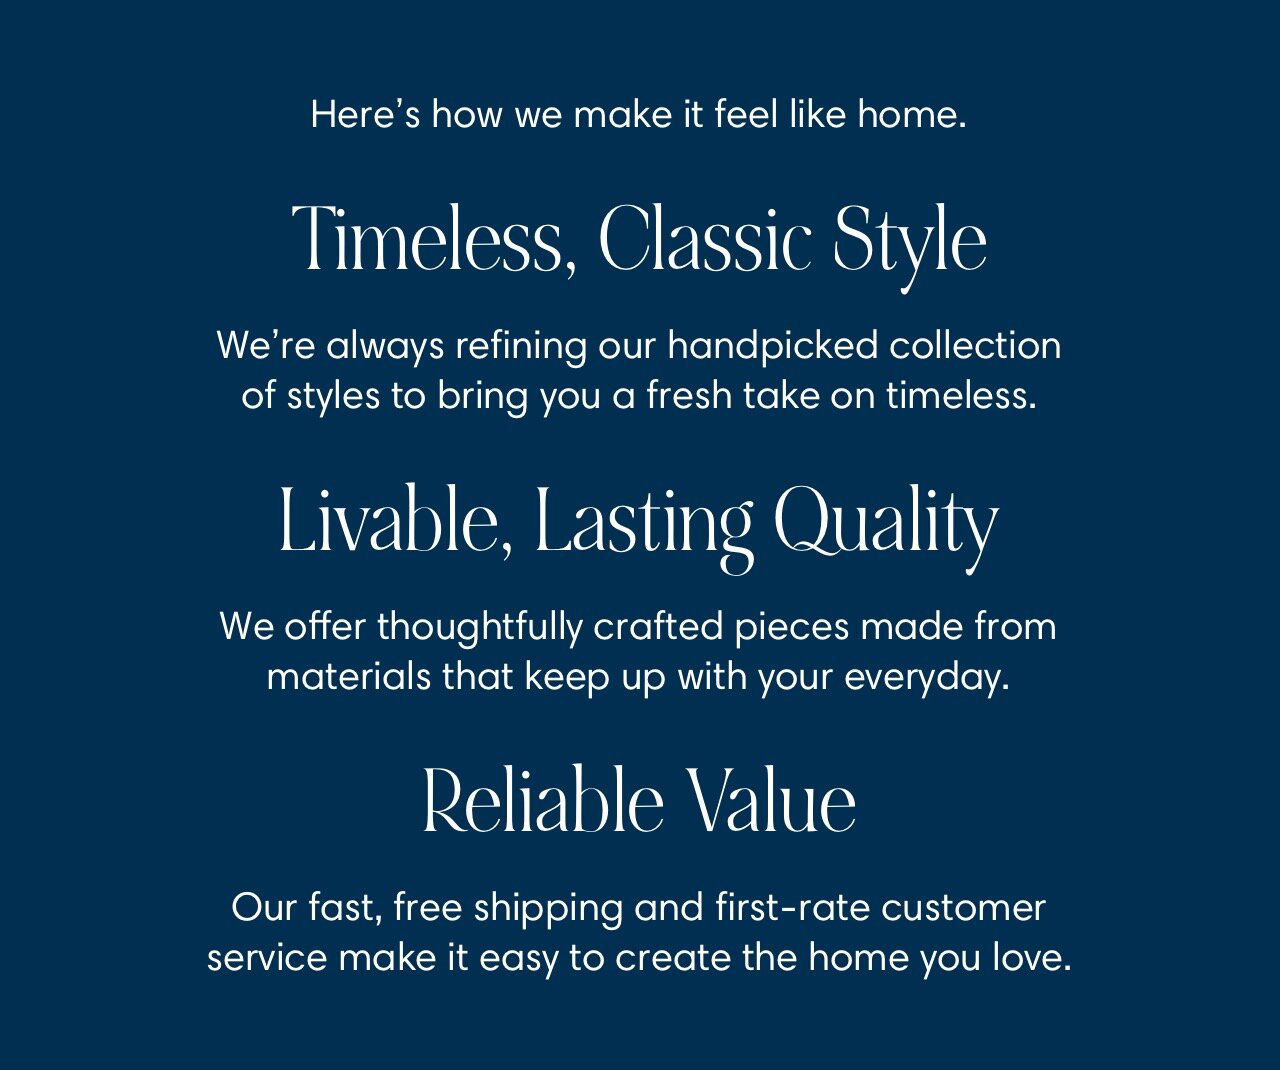 Heres how we make it feel like home. Timeless, Classic Style We're always refining our handpicked collection of styles to bring you a fresh take on timeless. Livable, Lasting Quality We offer thoughtfully crafted pieces made from materials that keep up with your everyday. Reliable Value Our fast, free shipping and first-rate customer service make it easy to create the home you love. 